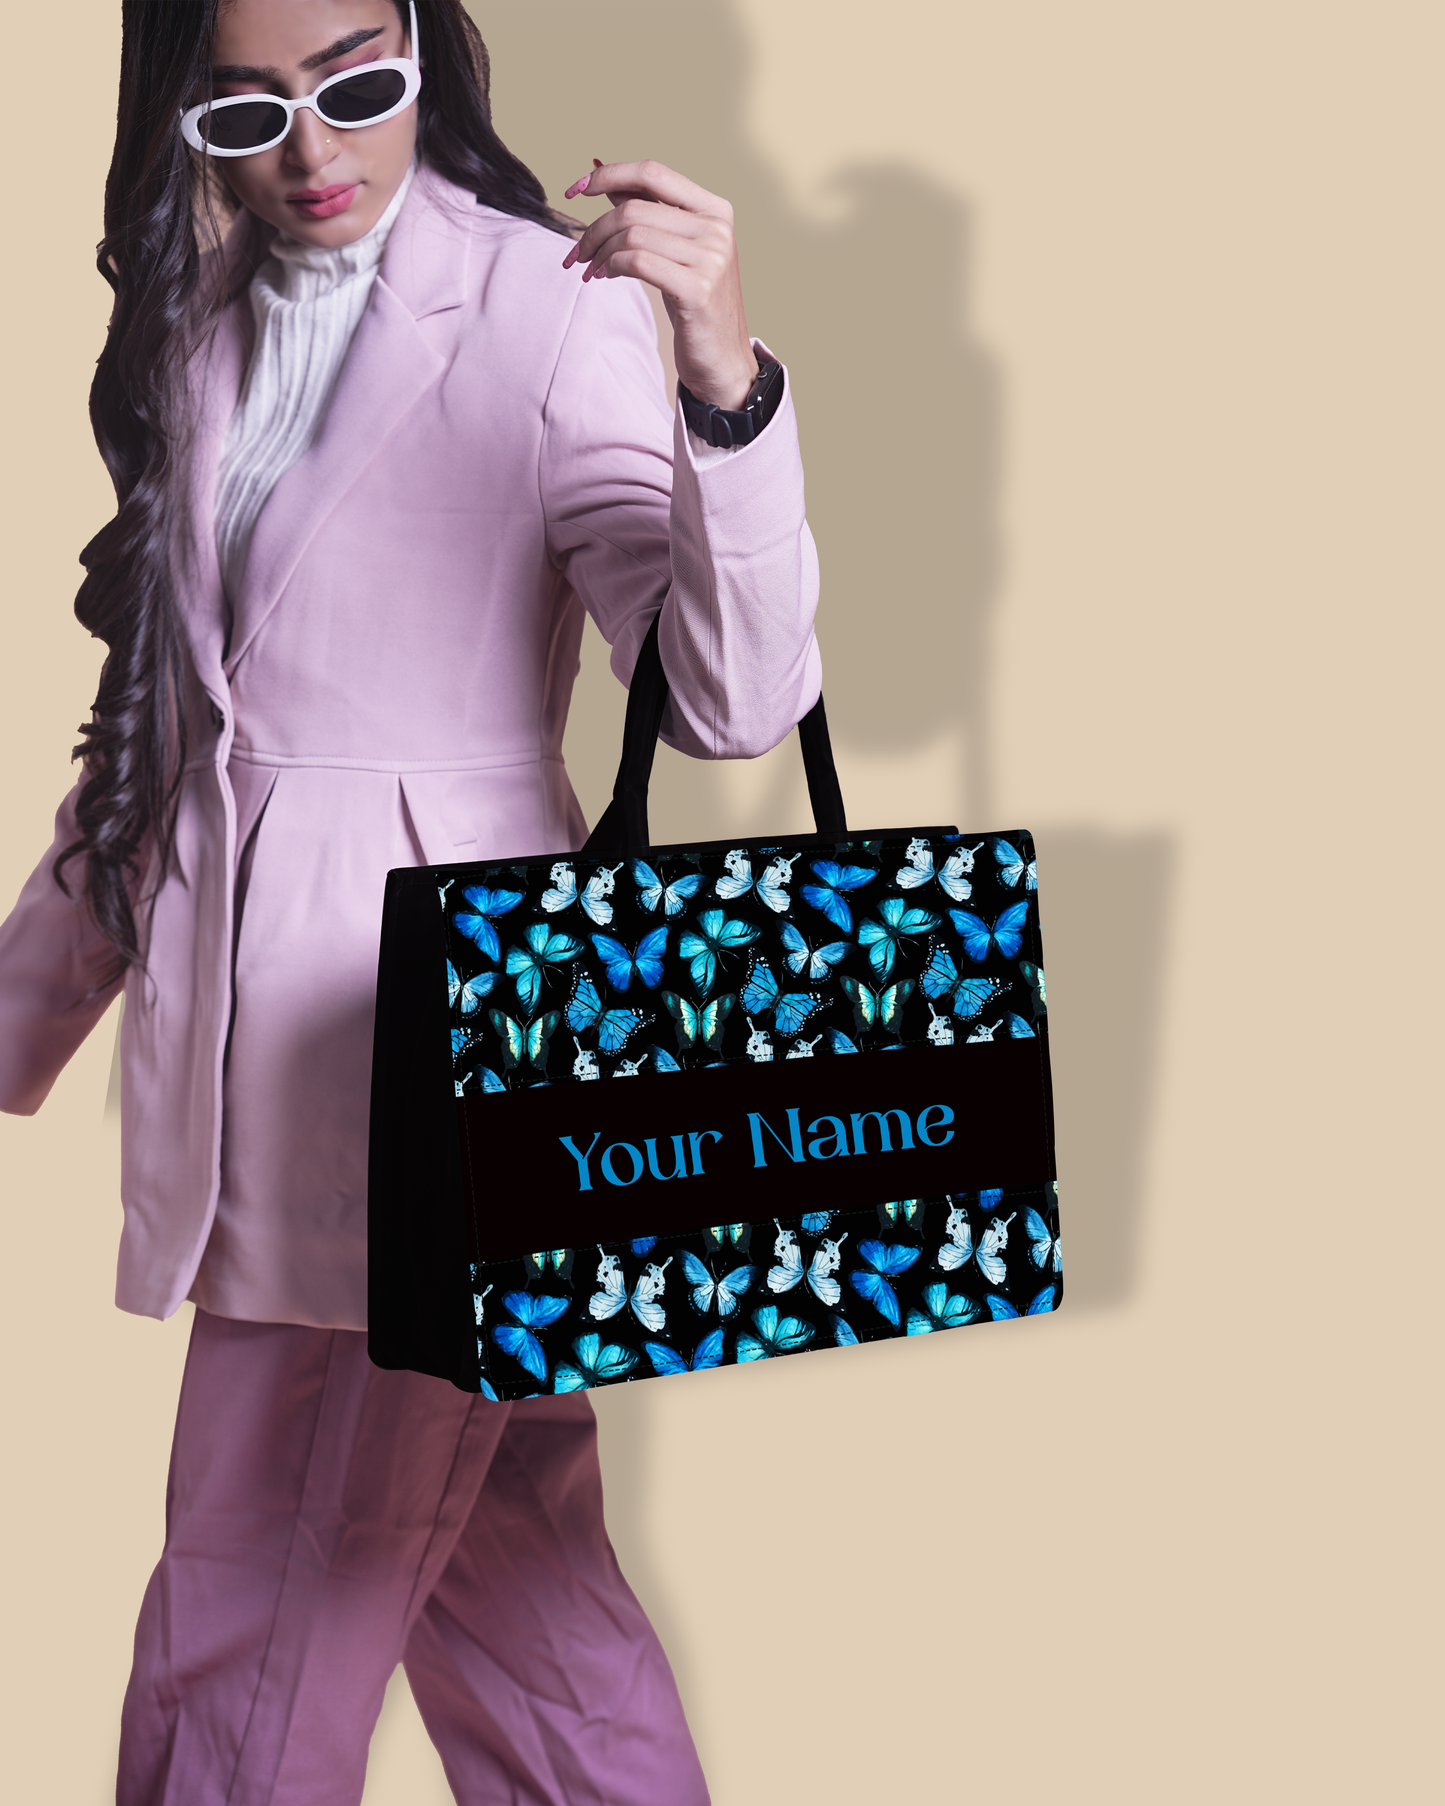 Personalized Tote Bag Designed With Blue Flying Butterflies